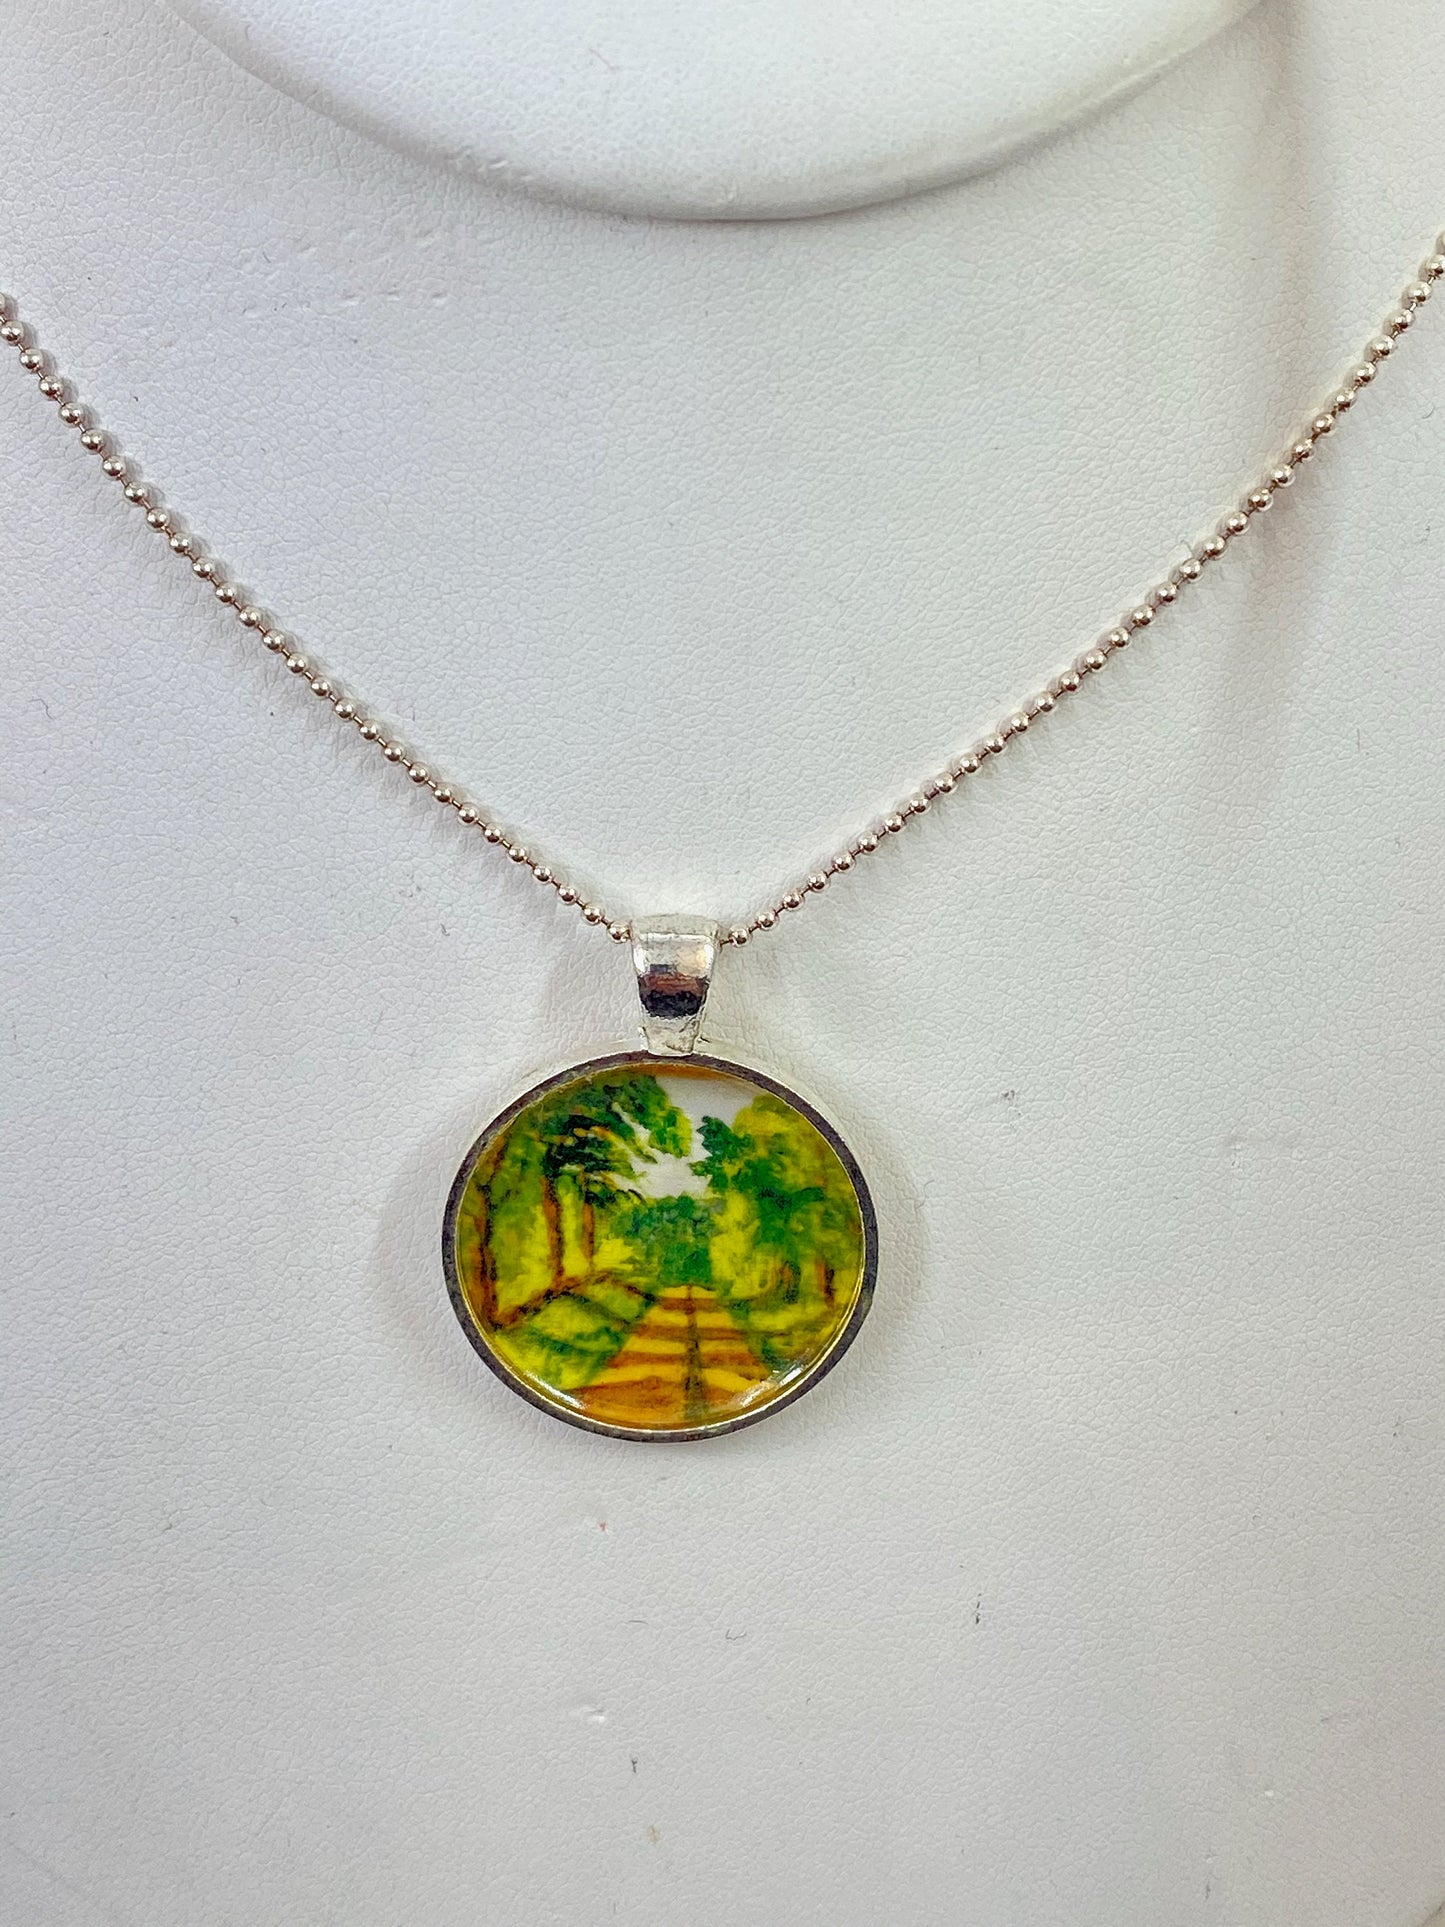 Maine country road scene hand painted pendant. Original print painted by me. Set in a silver bezel on a sterling silver chain.